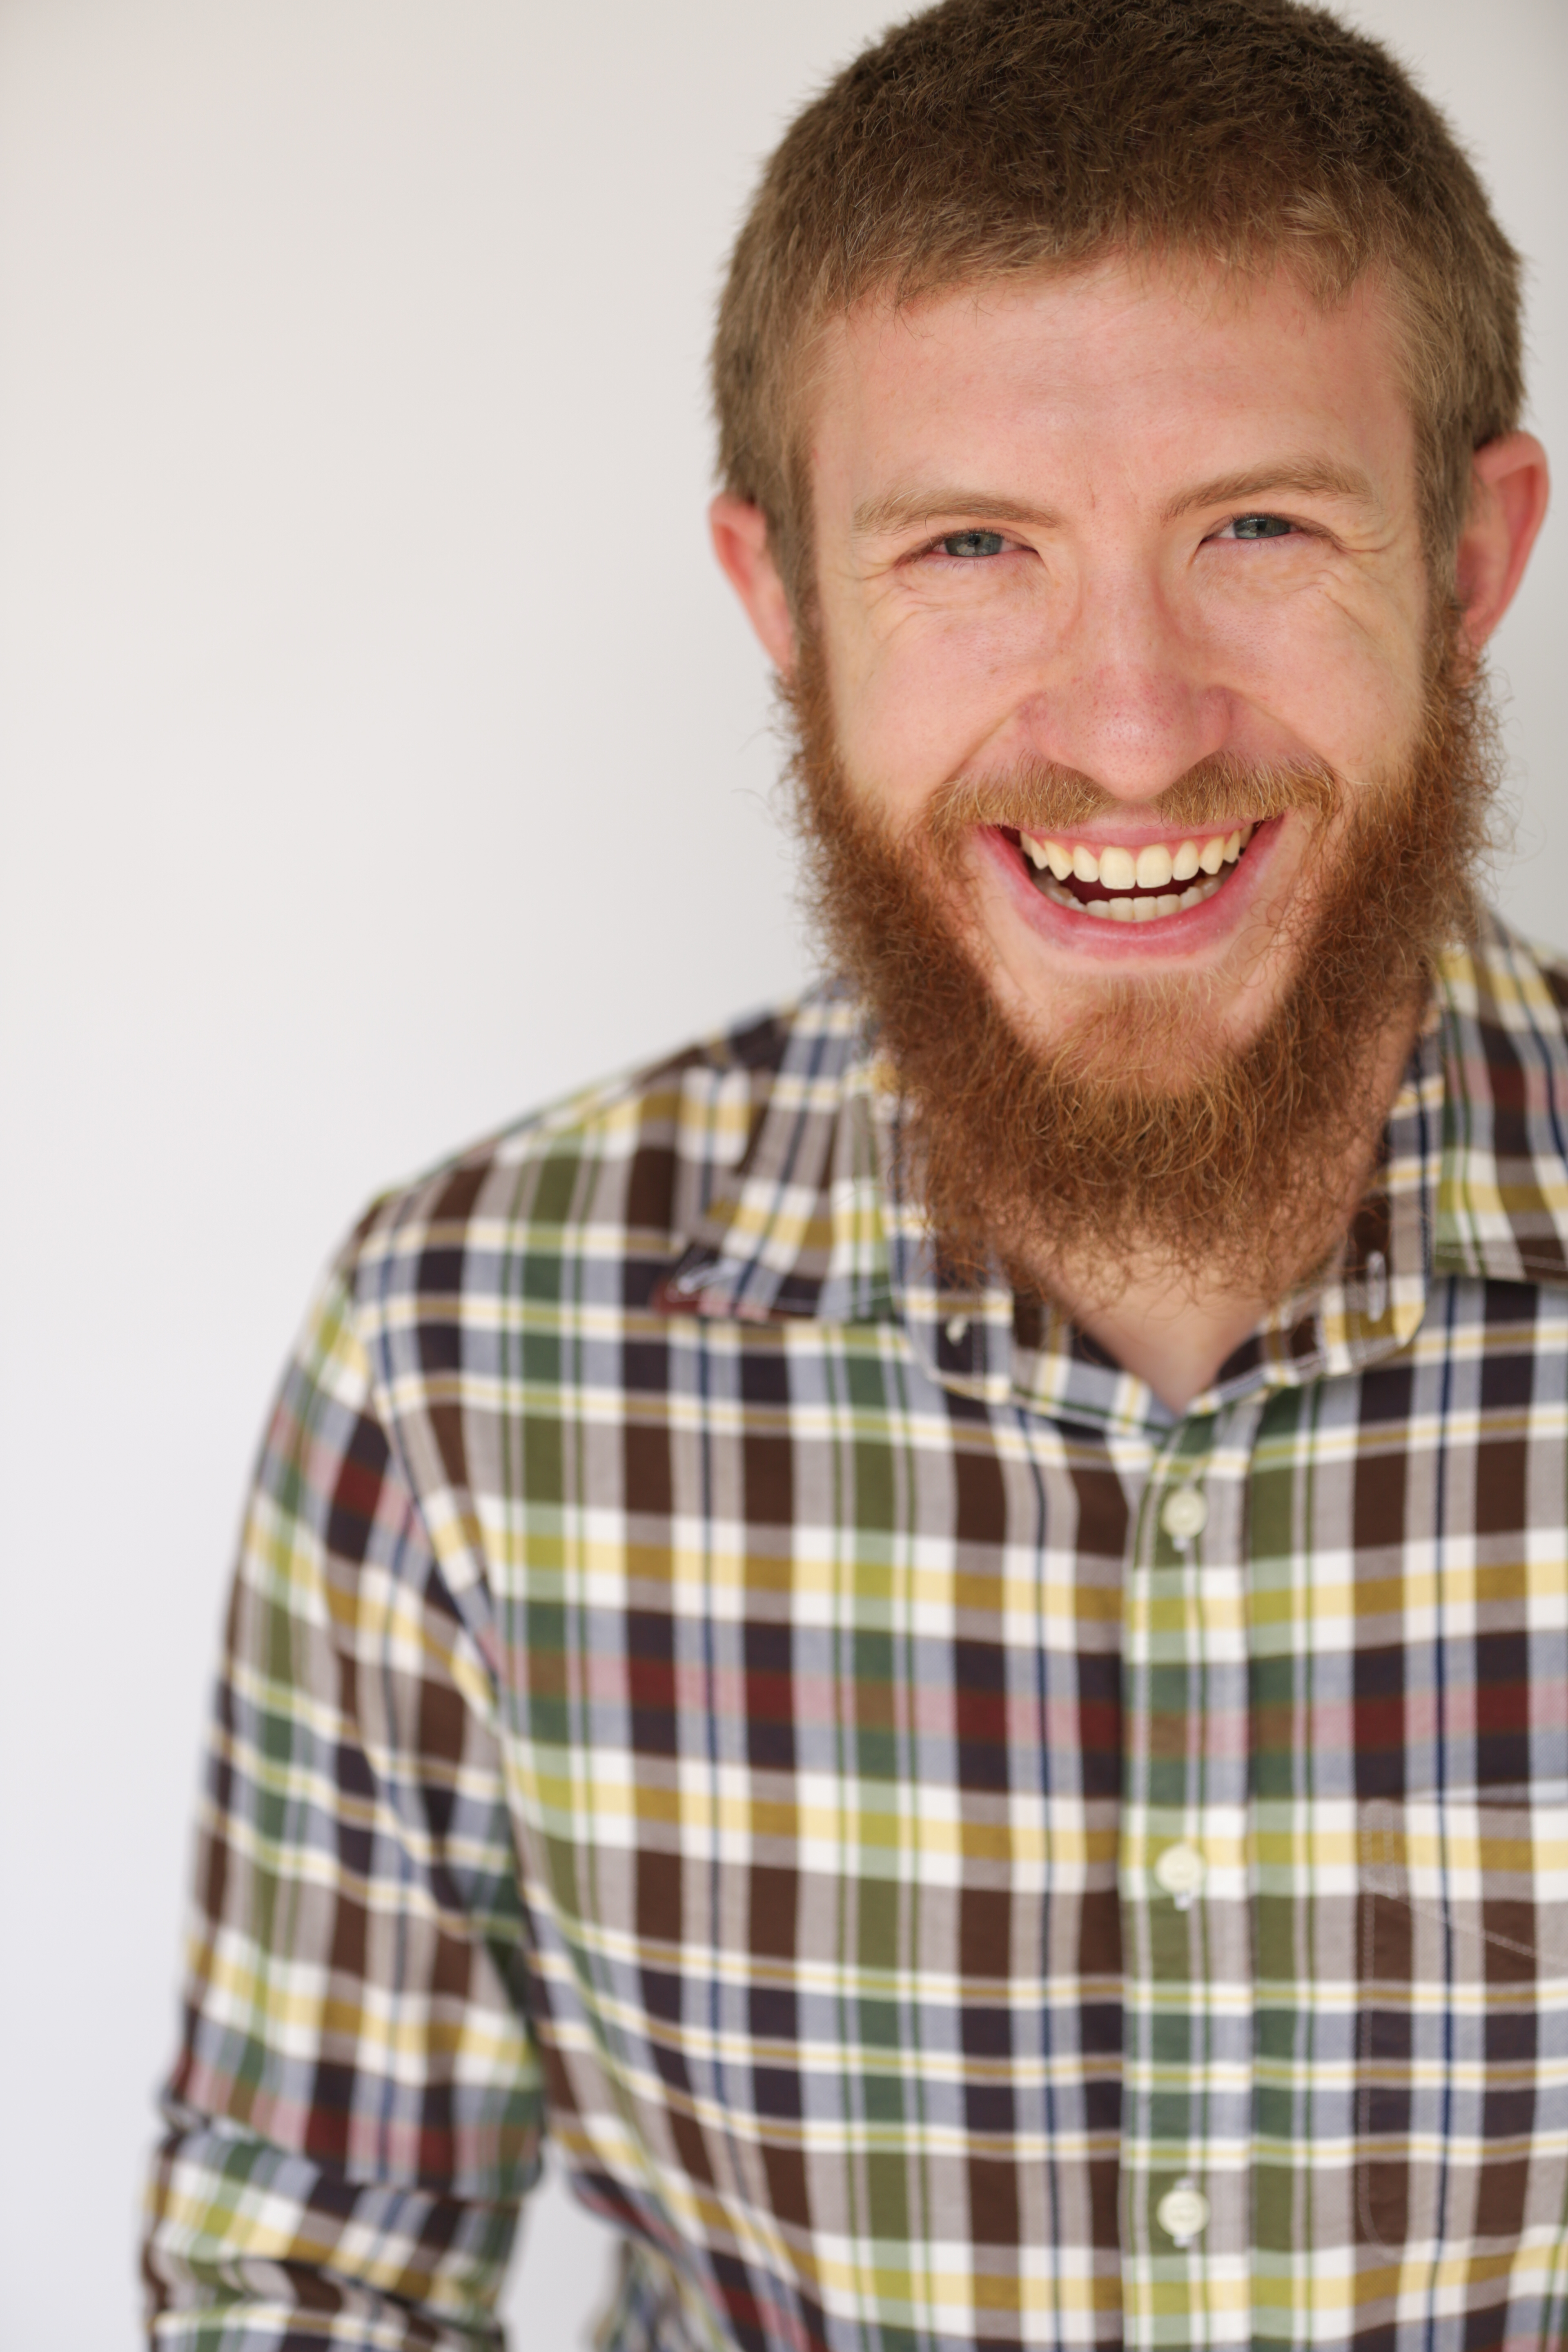 Smiling Caucasian man with curly red hair and beard wearing a blue and yellow plaid shirt.